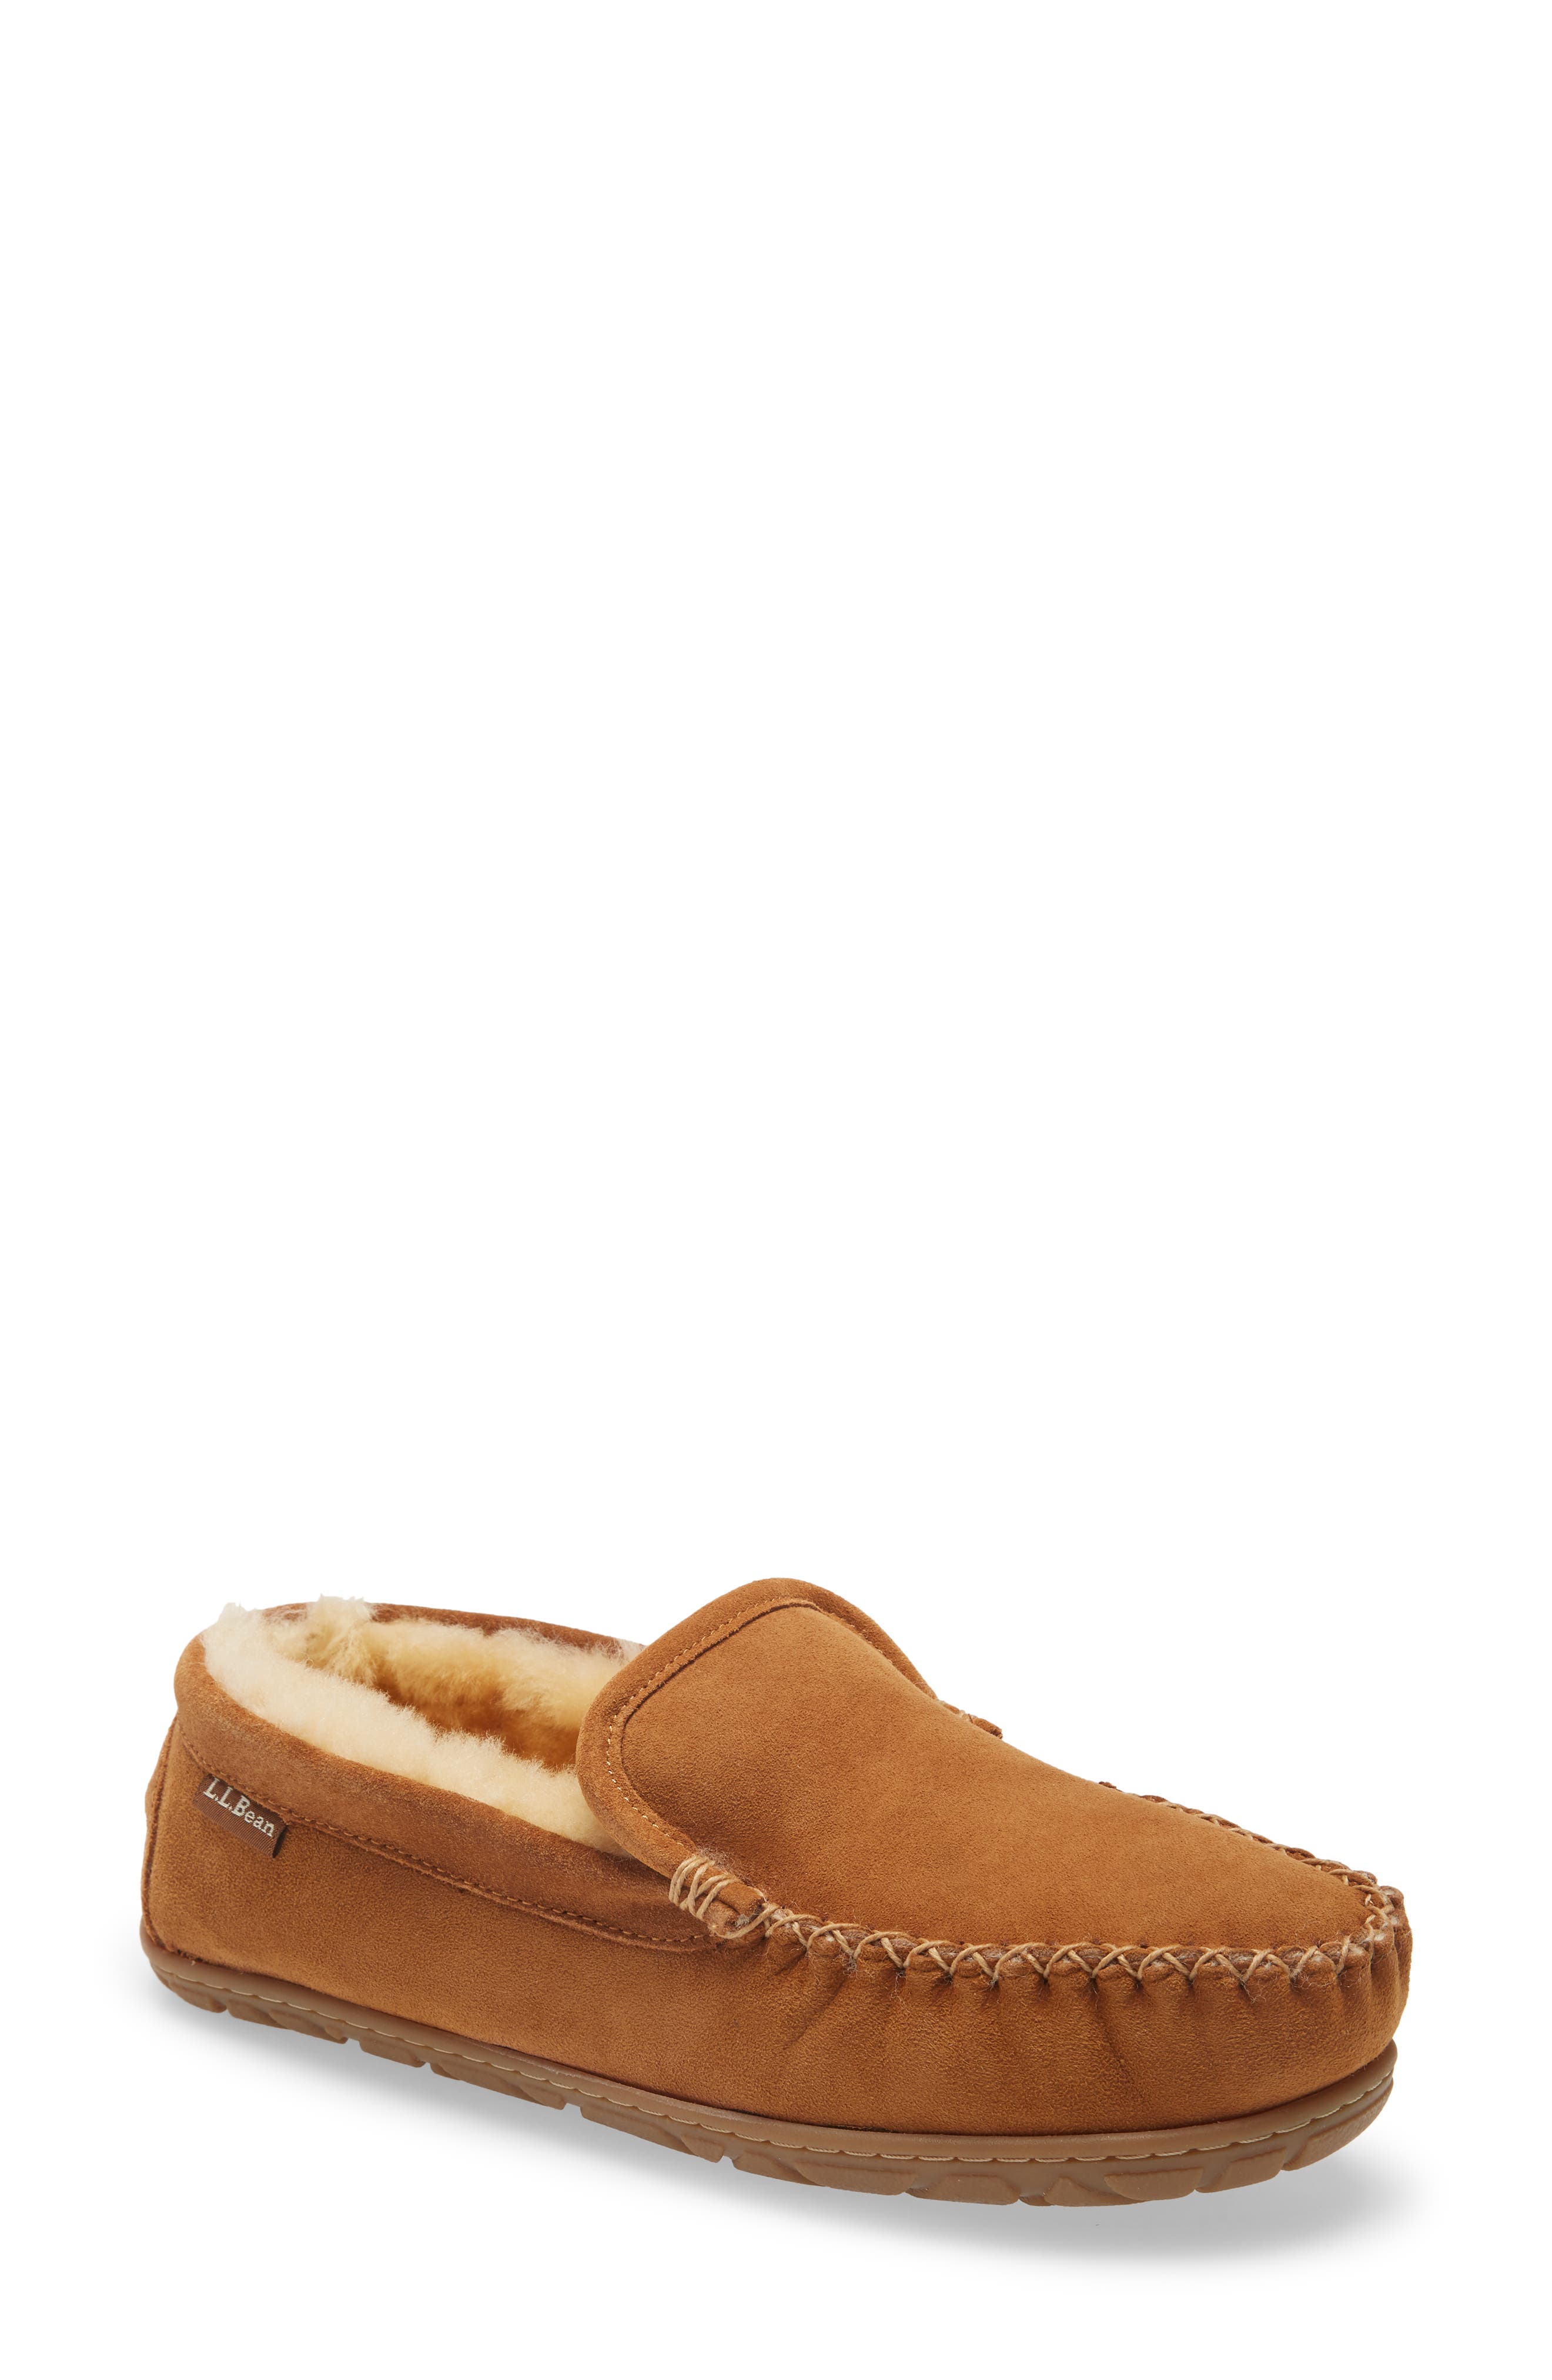 ll bean mens moccasin slippers